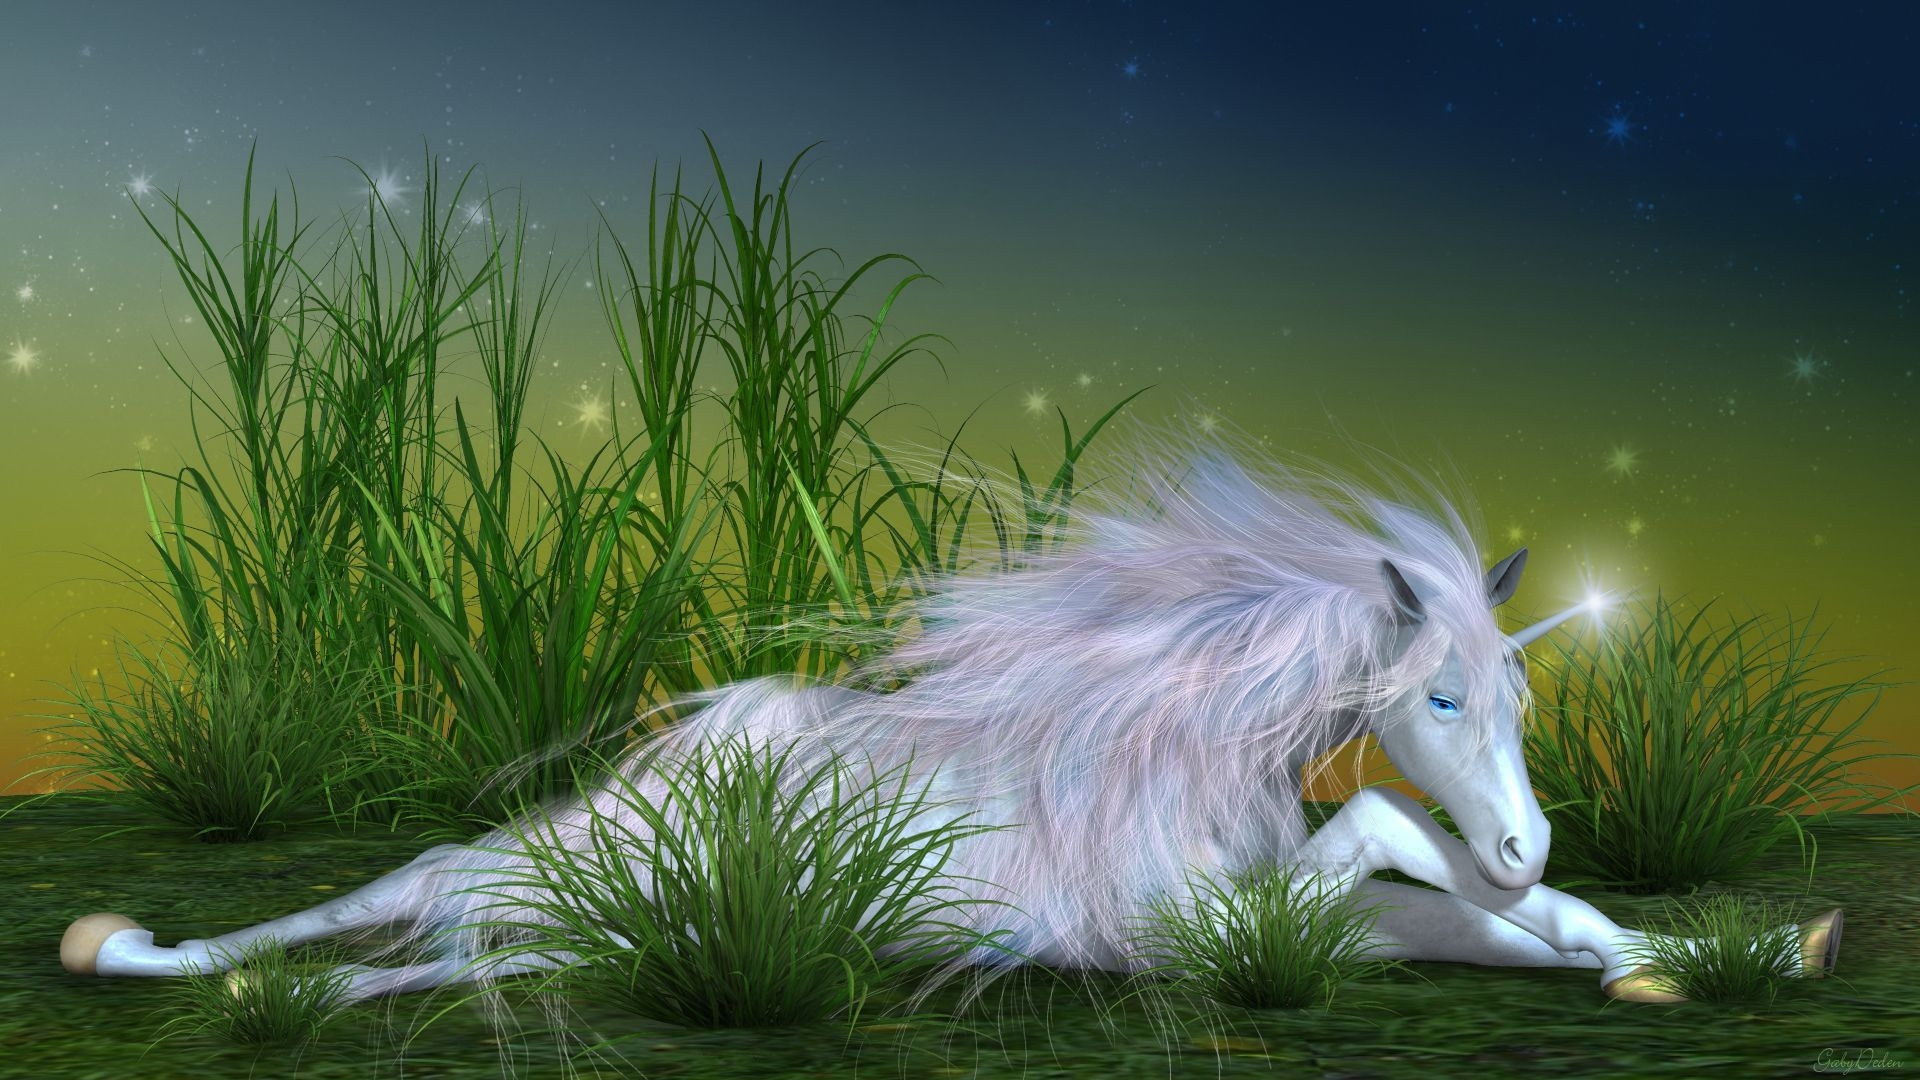 White Long Haired Animal on Green Grass. Wallpaper in 1920x1080 Resolution